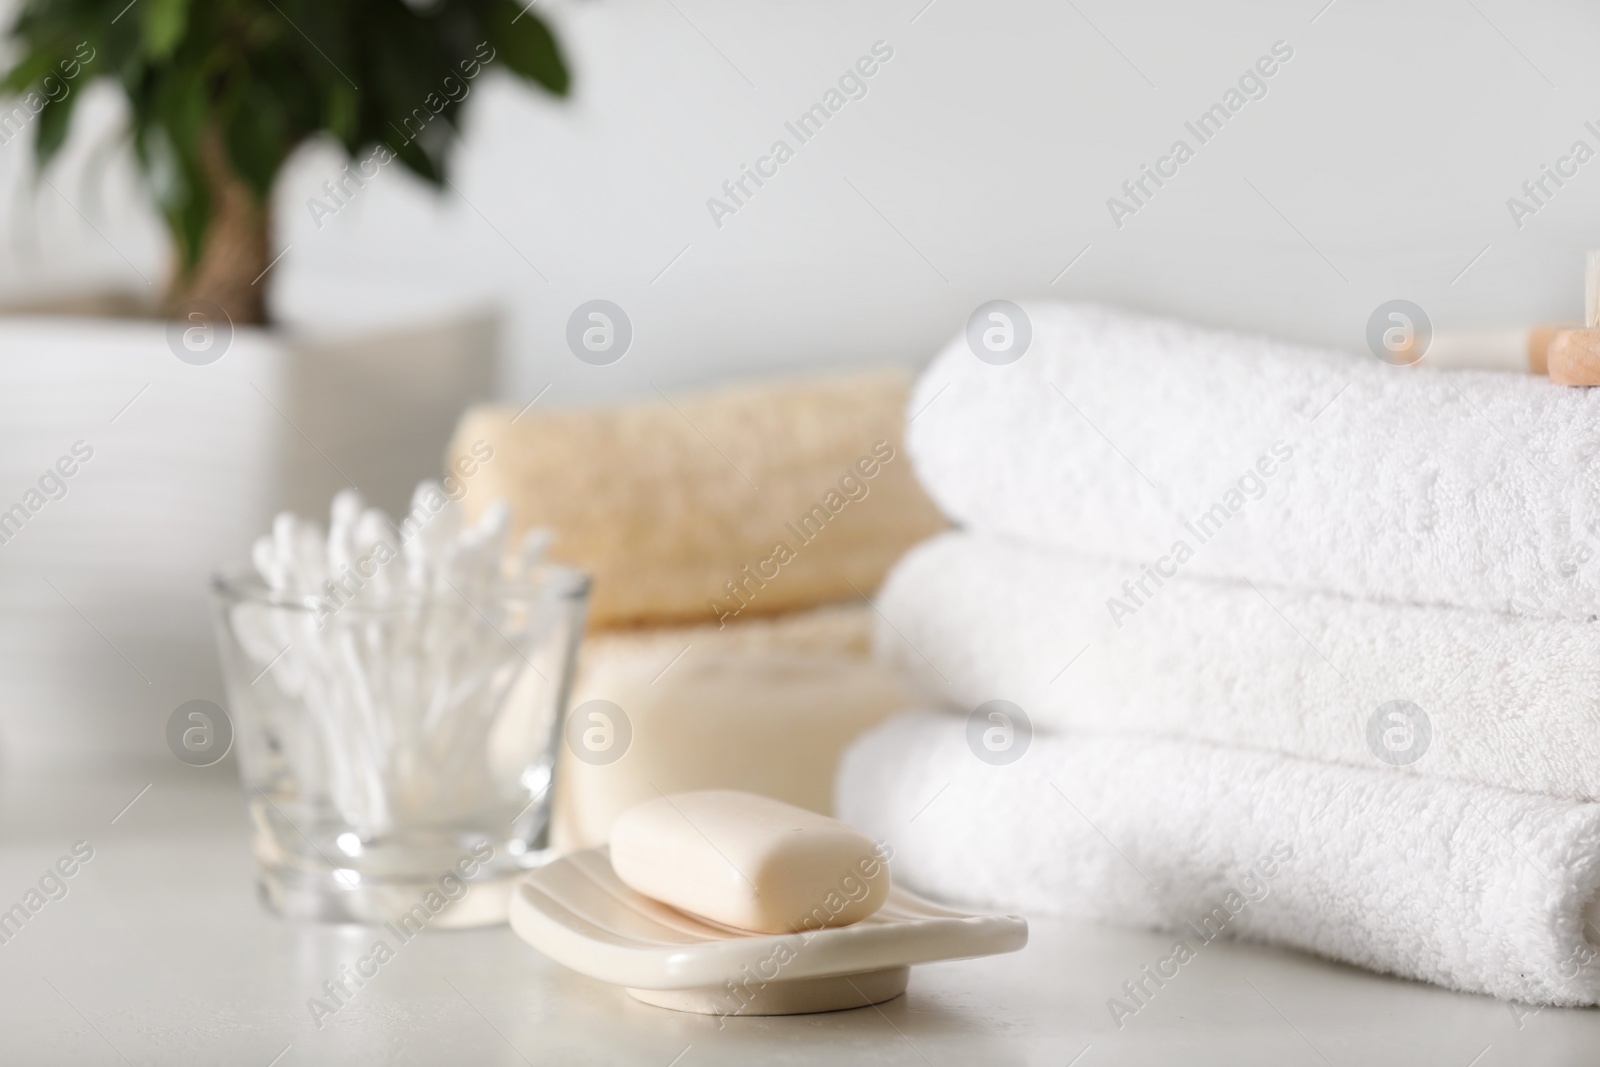 Photo of Soap bar and towels on white table indoors